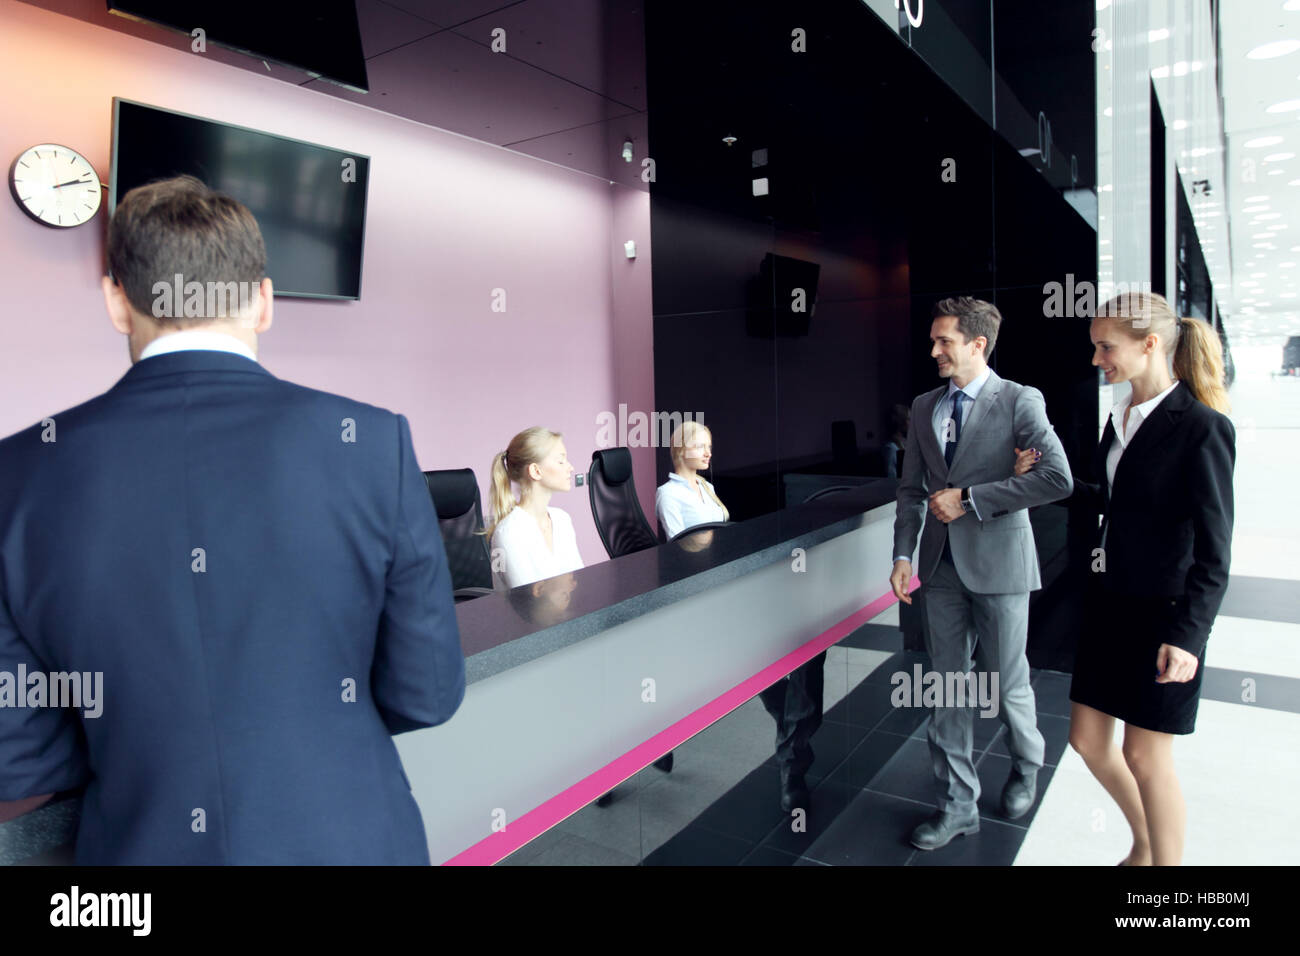 Business people at front desk of airport or modern office building Stock Photo